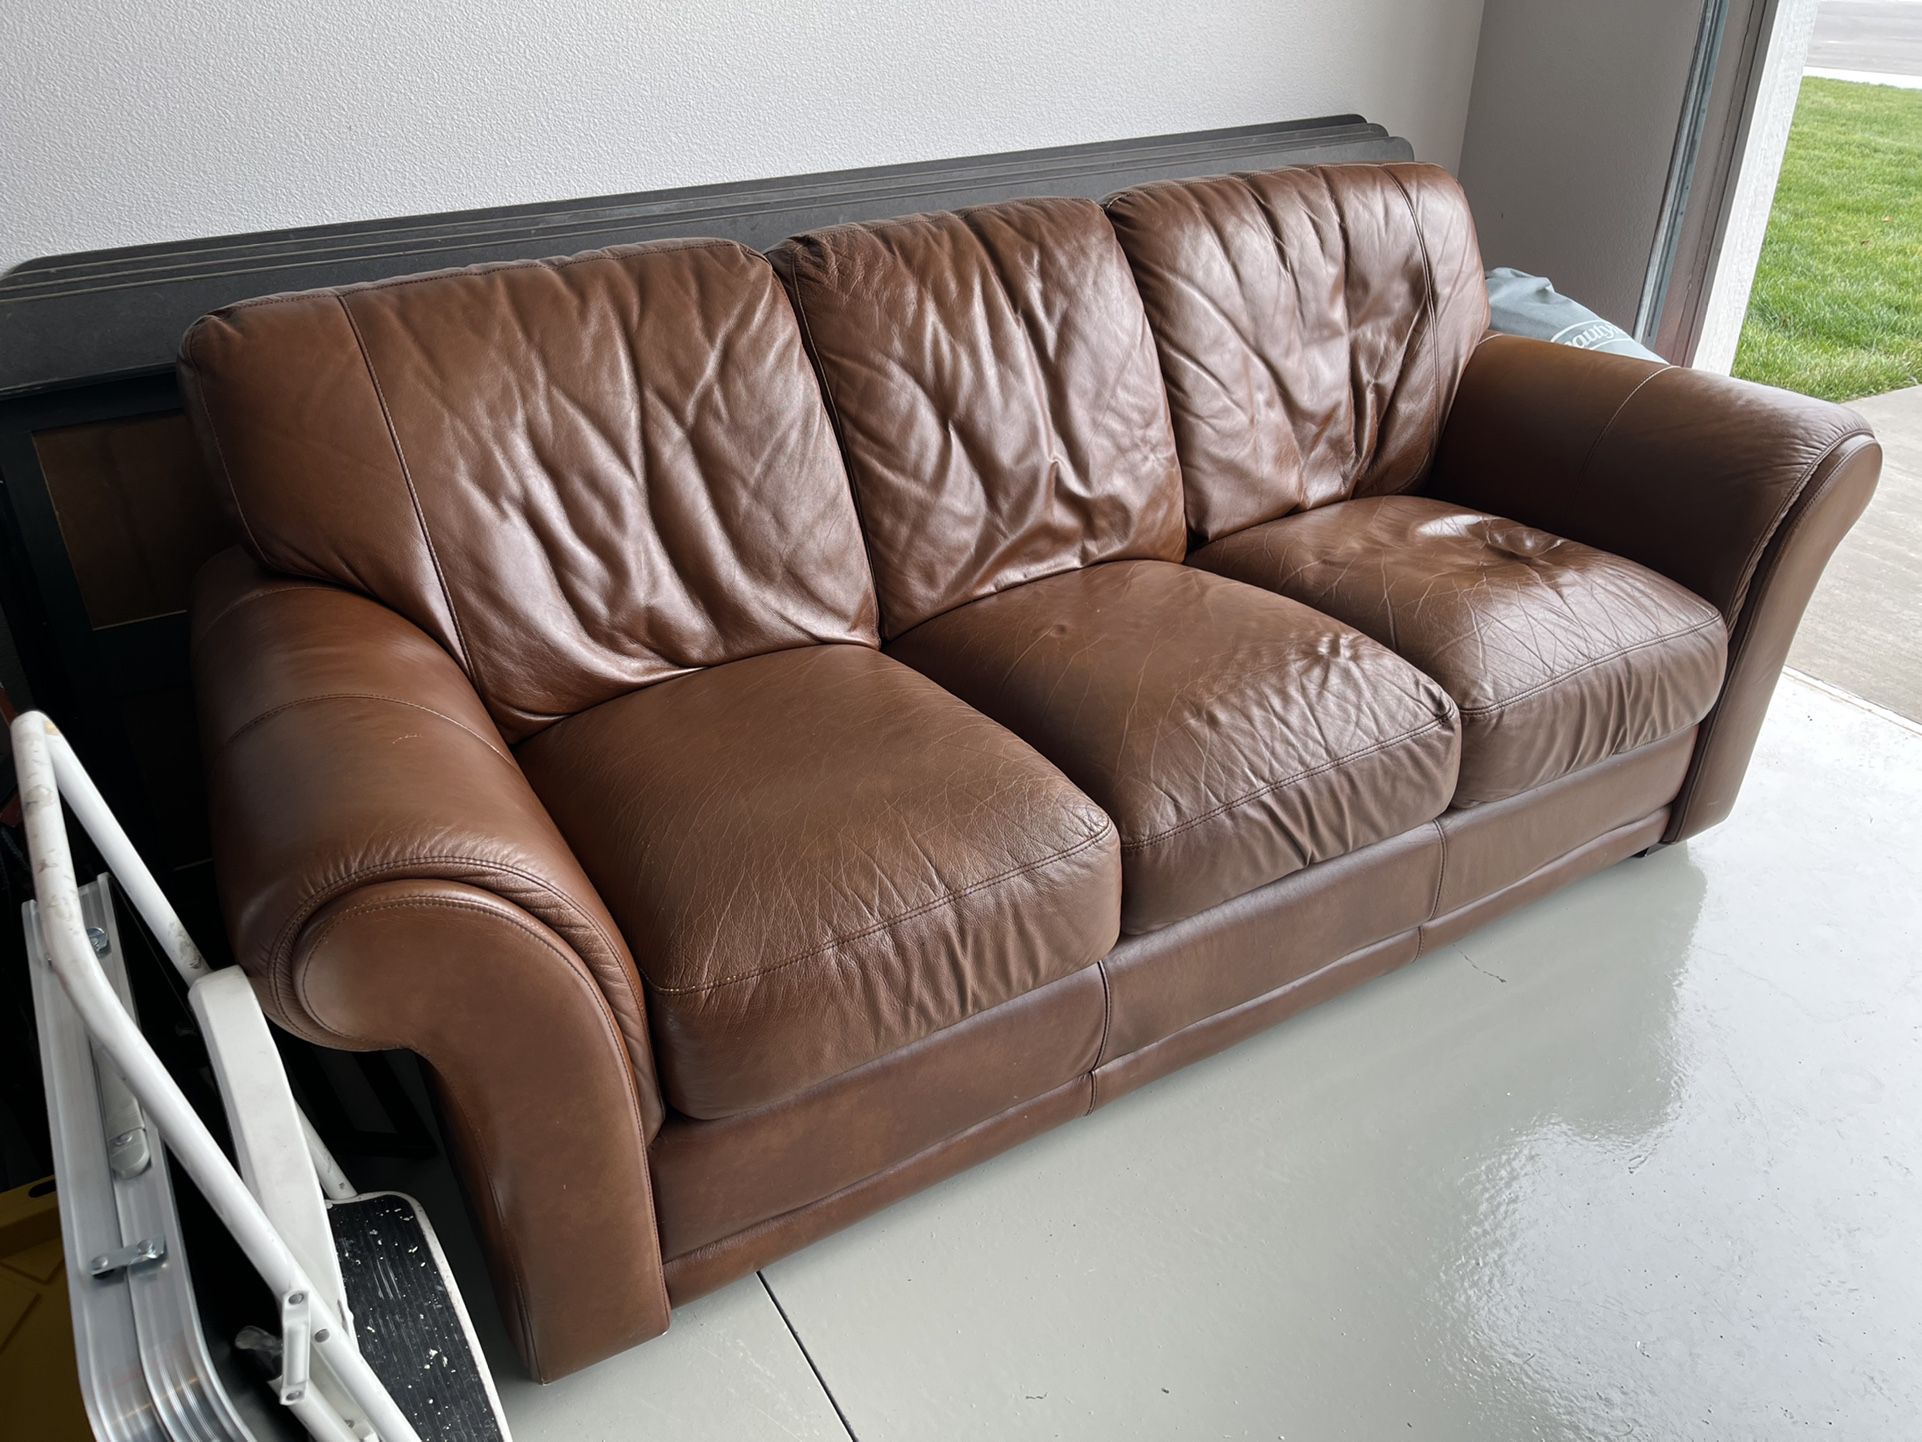 Leather sofa no longer needed in very good condition